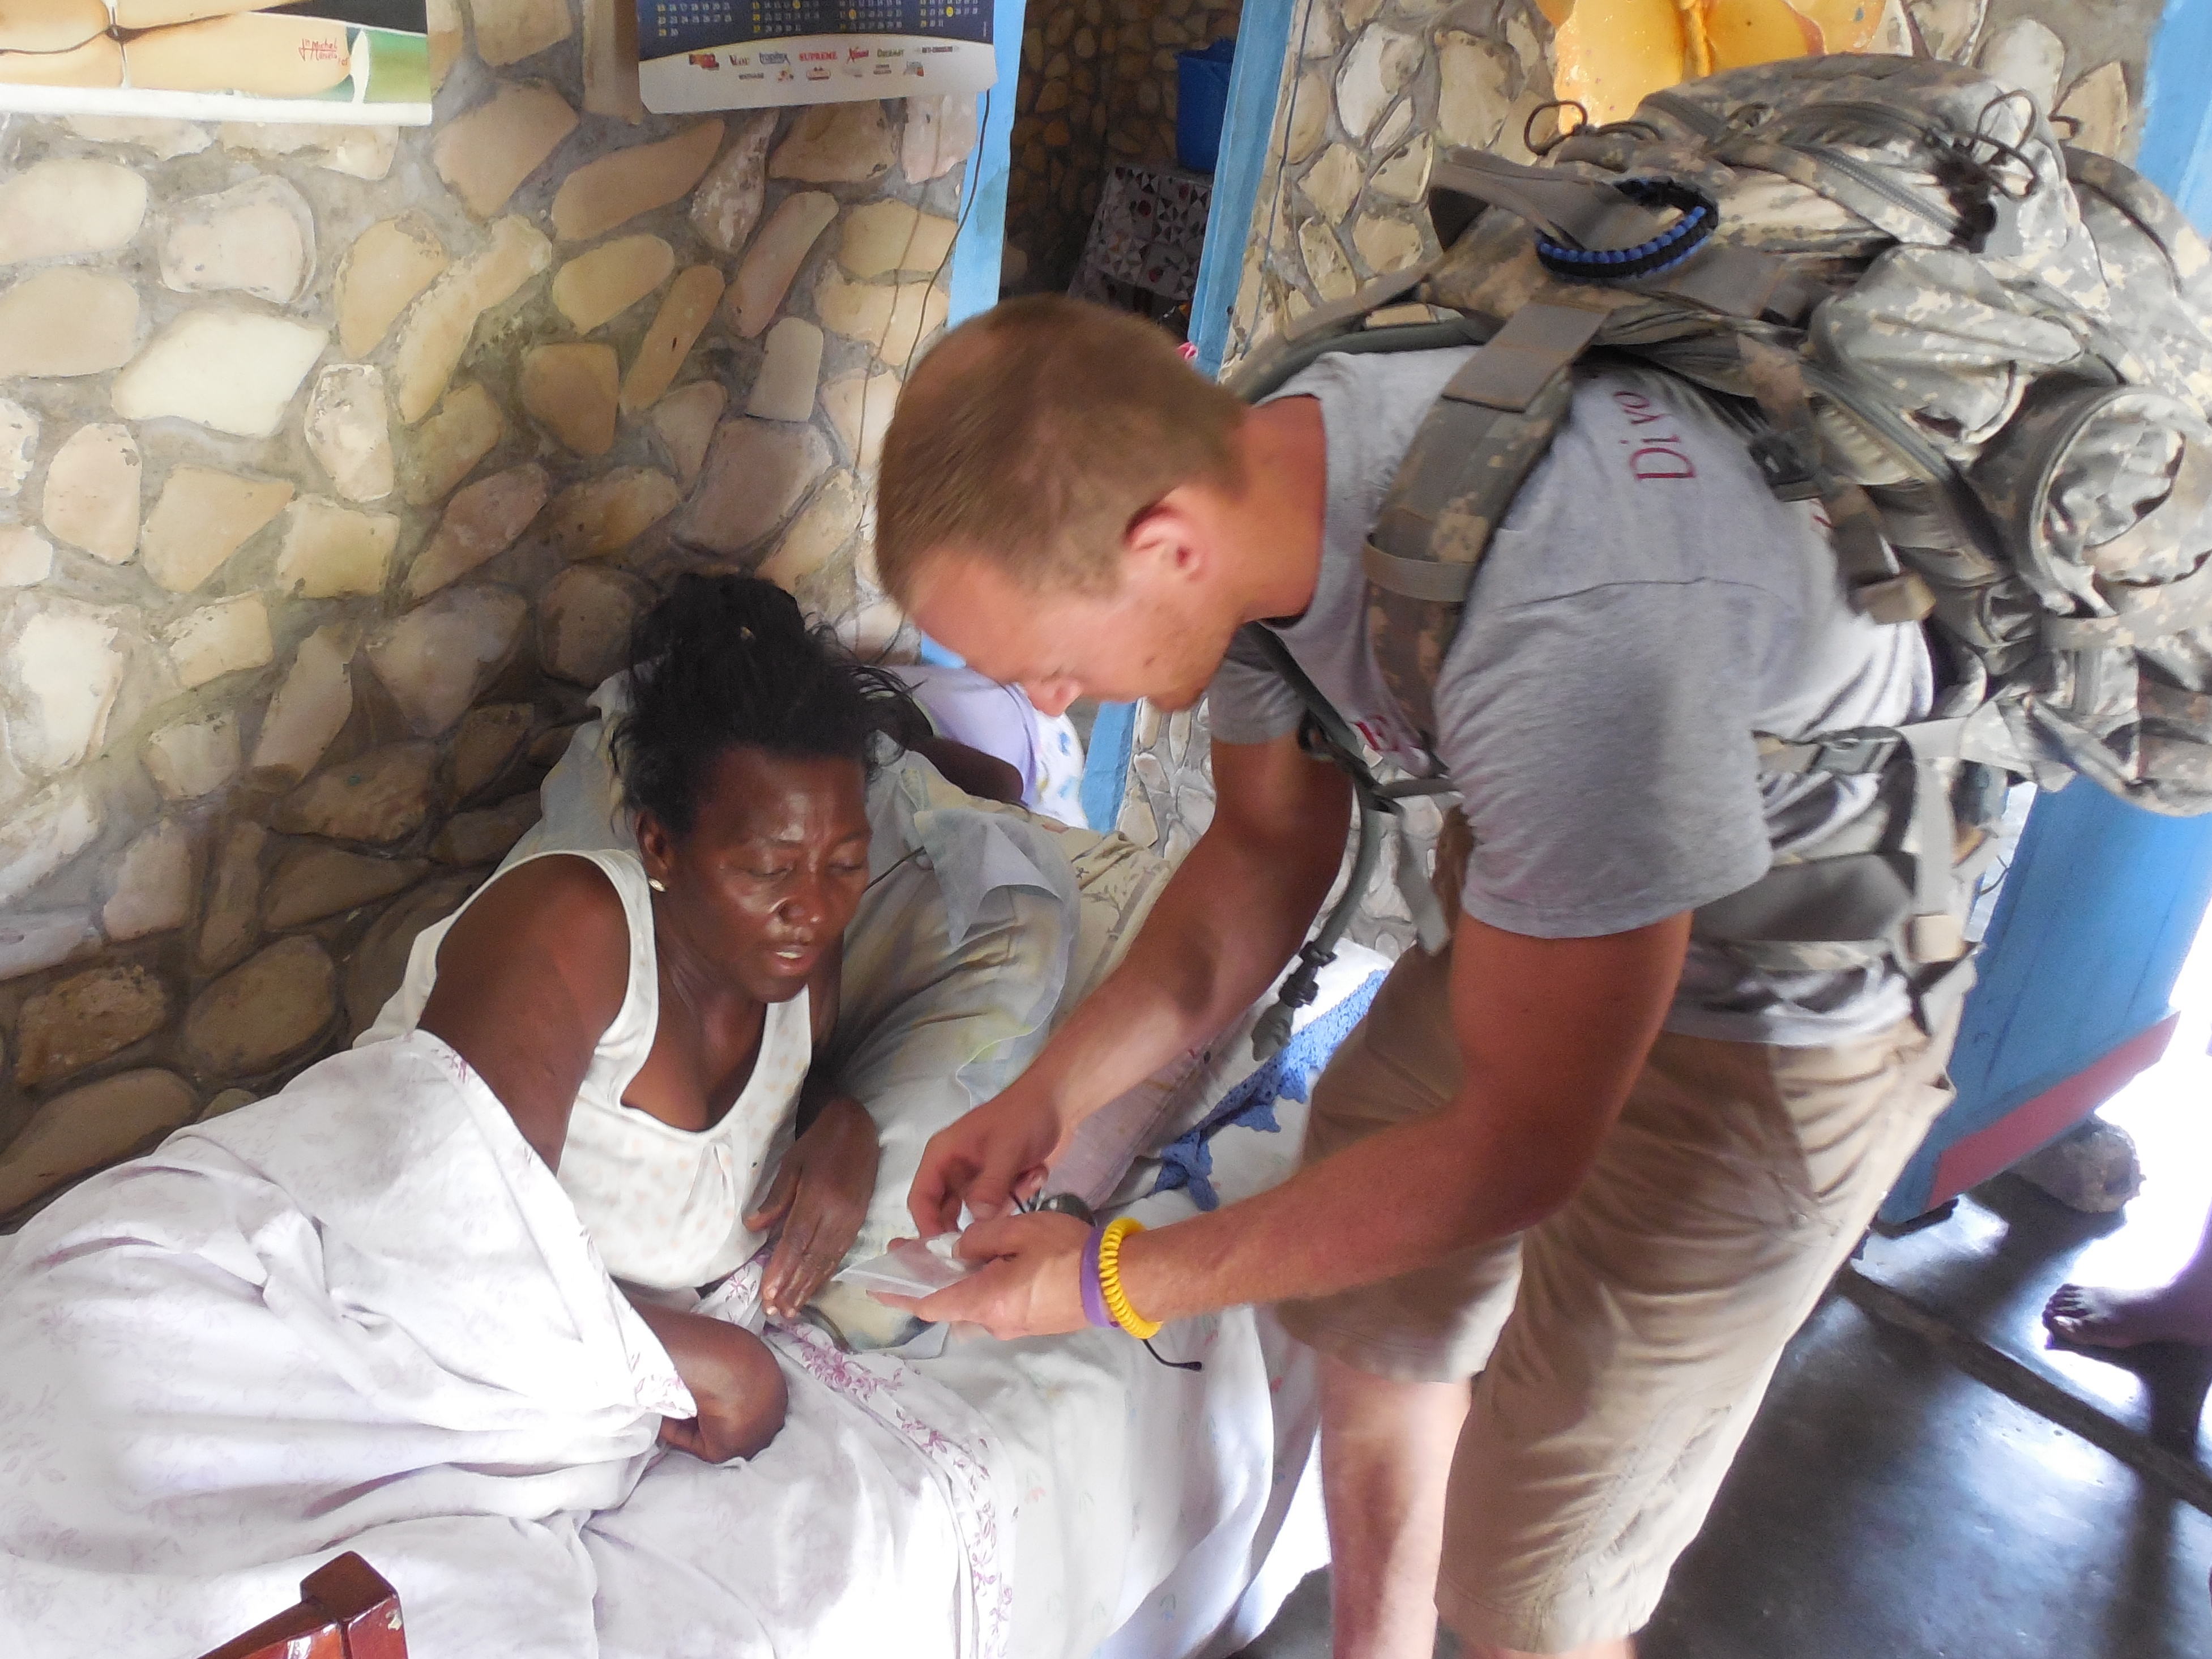 Cody giving medicine to a sick woman at her home.